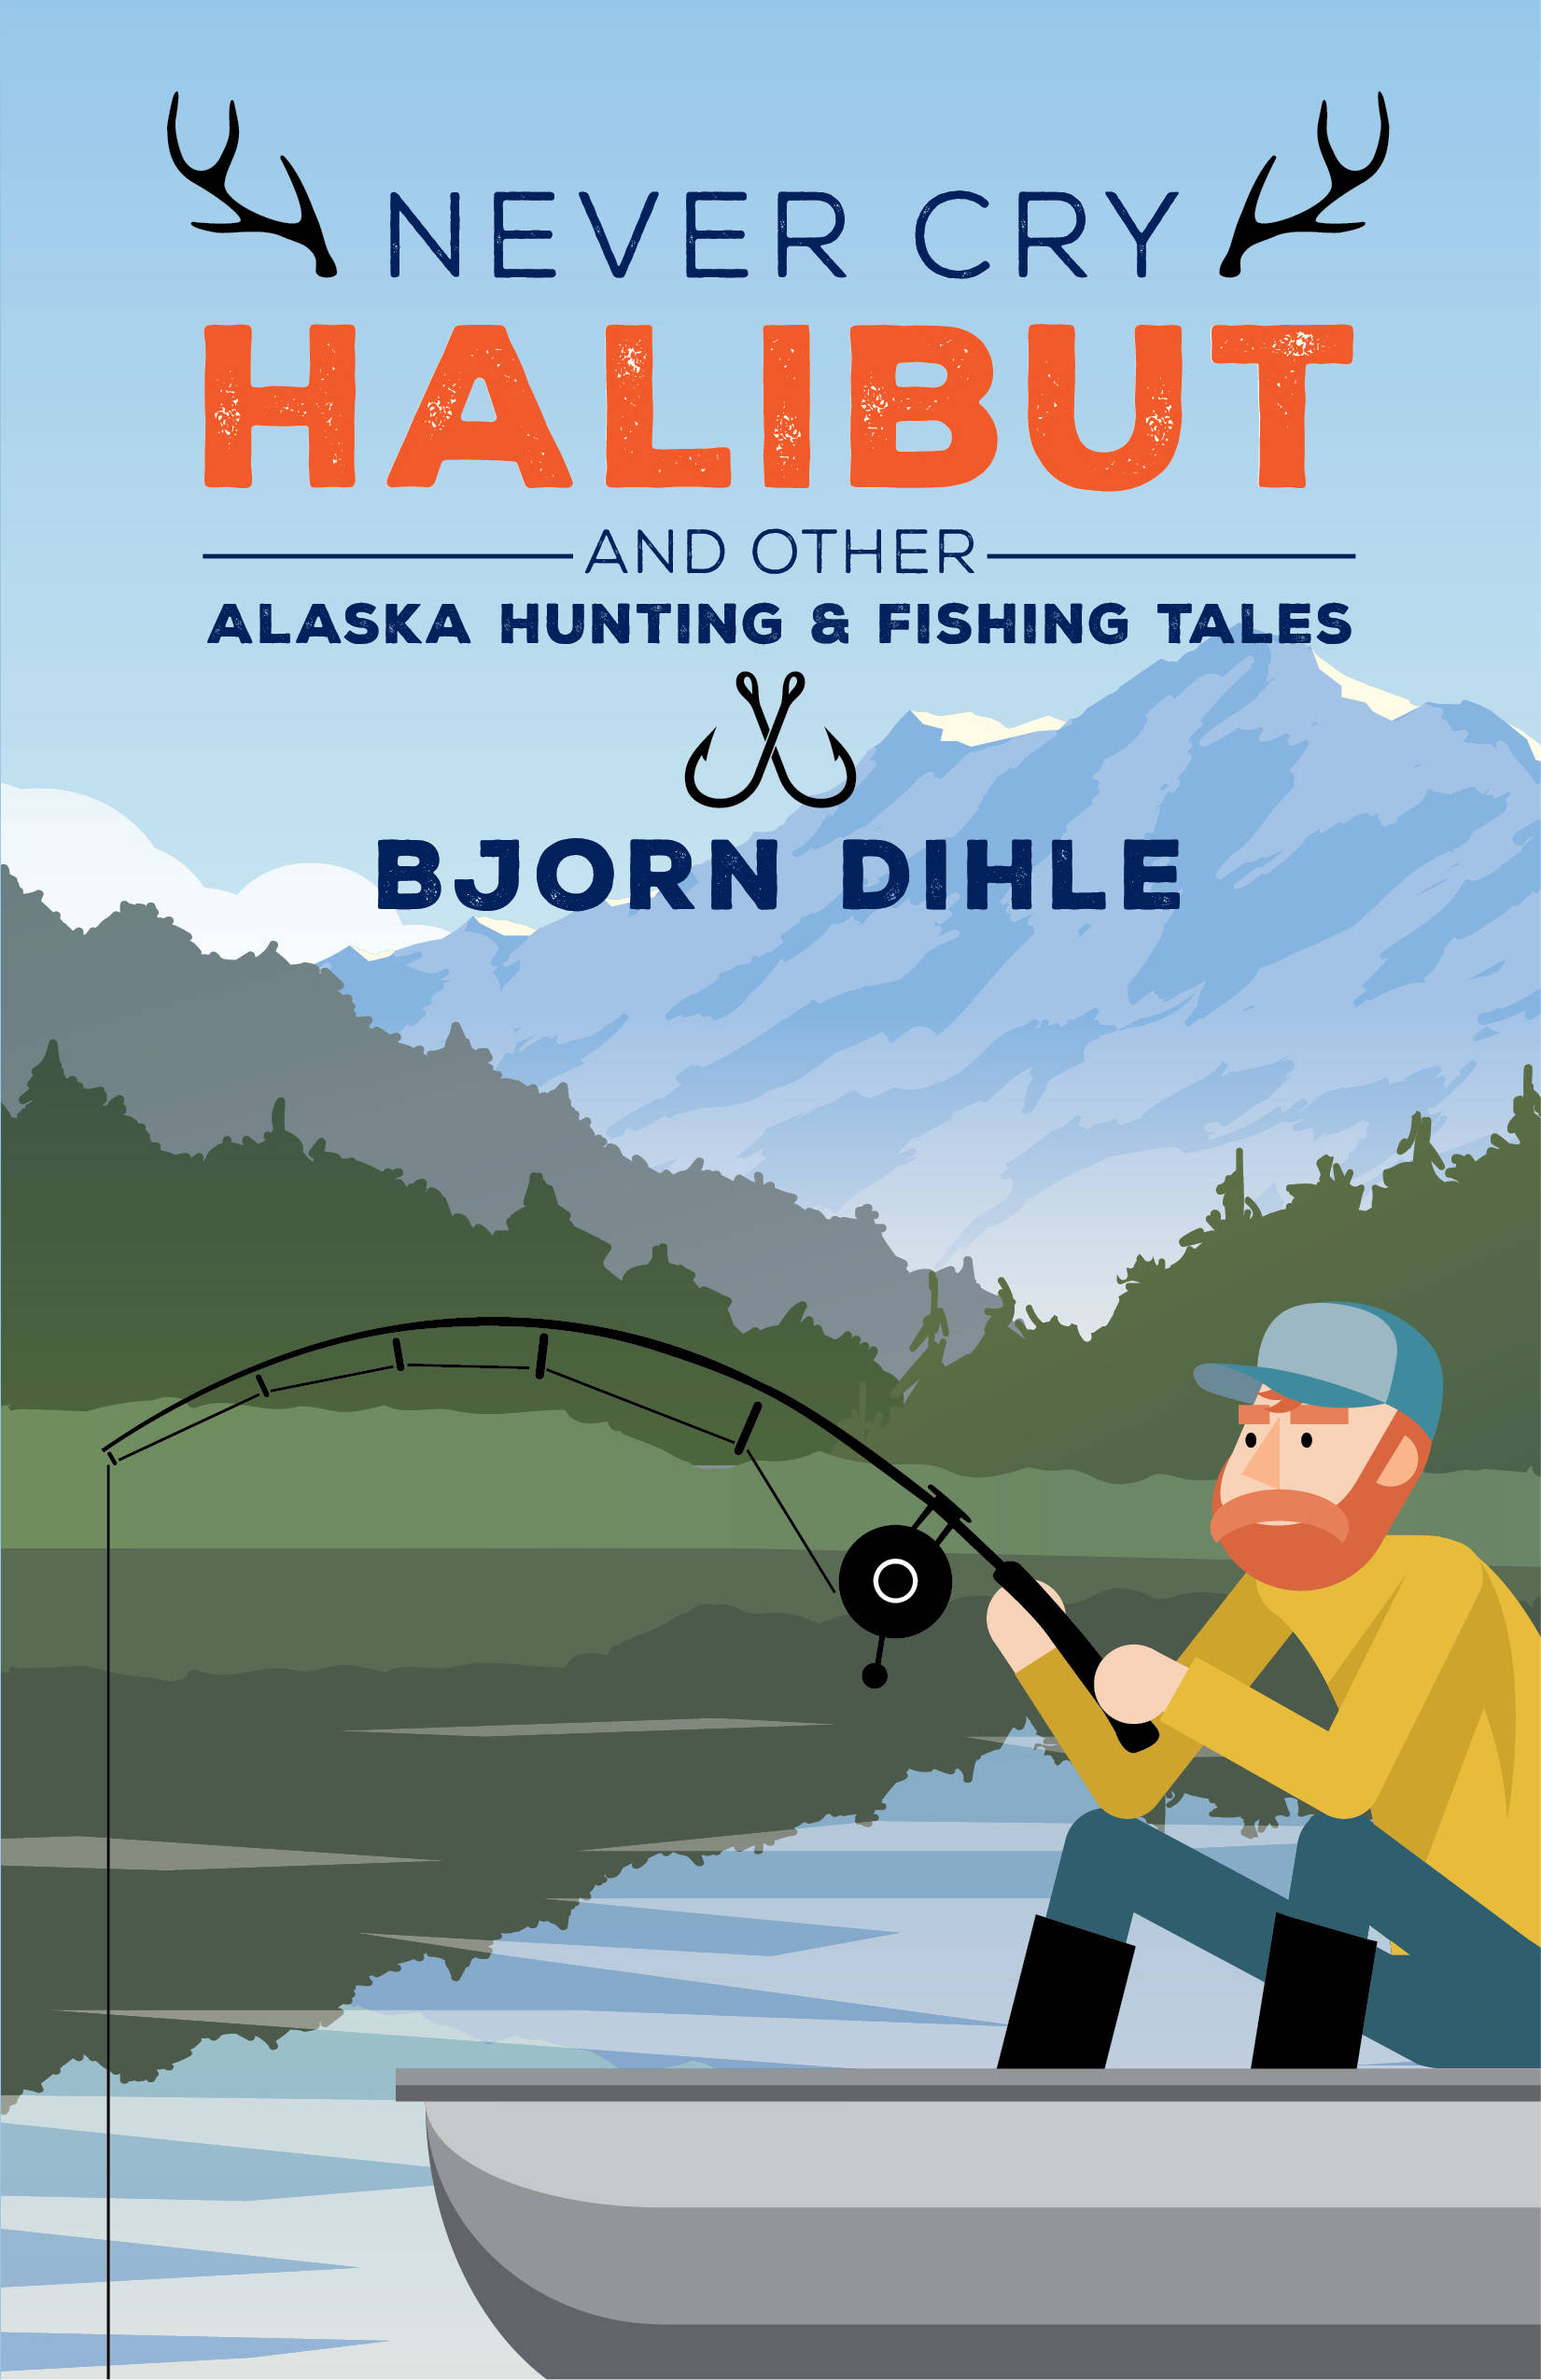 Book cover for “Never Cry Halibut” by Bjorn Dihle. Courtesy image.